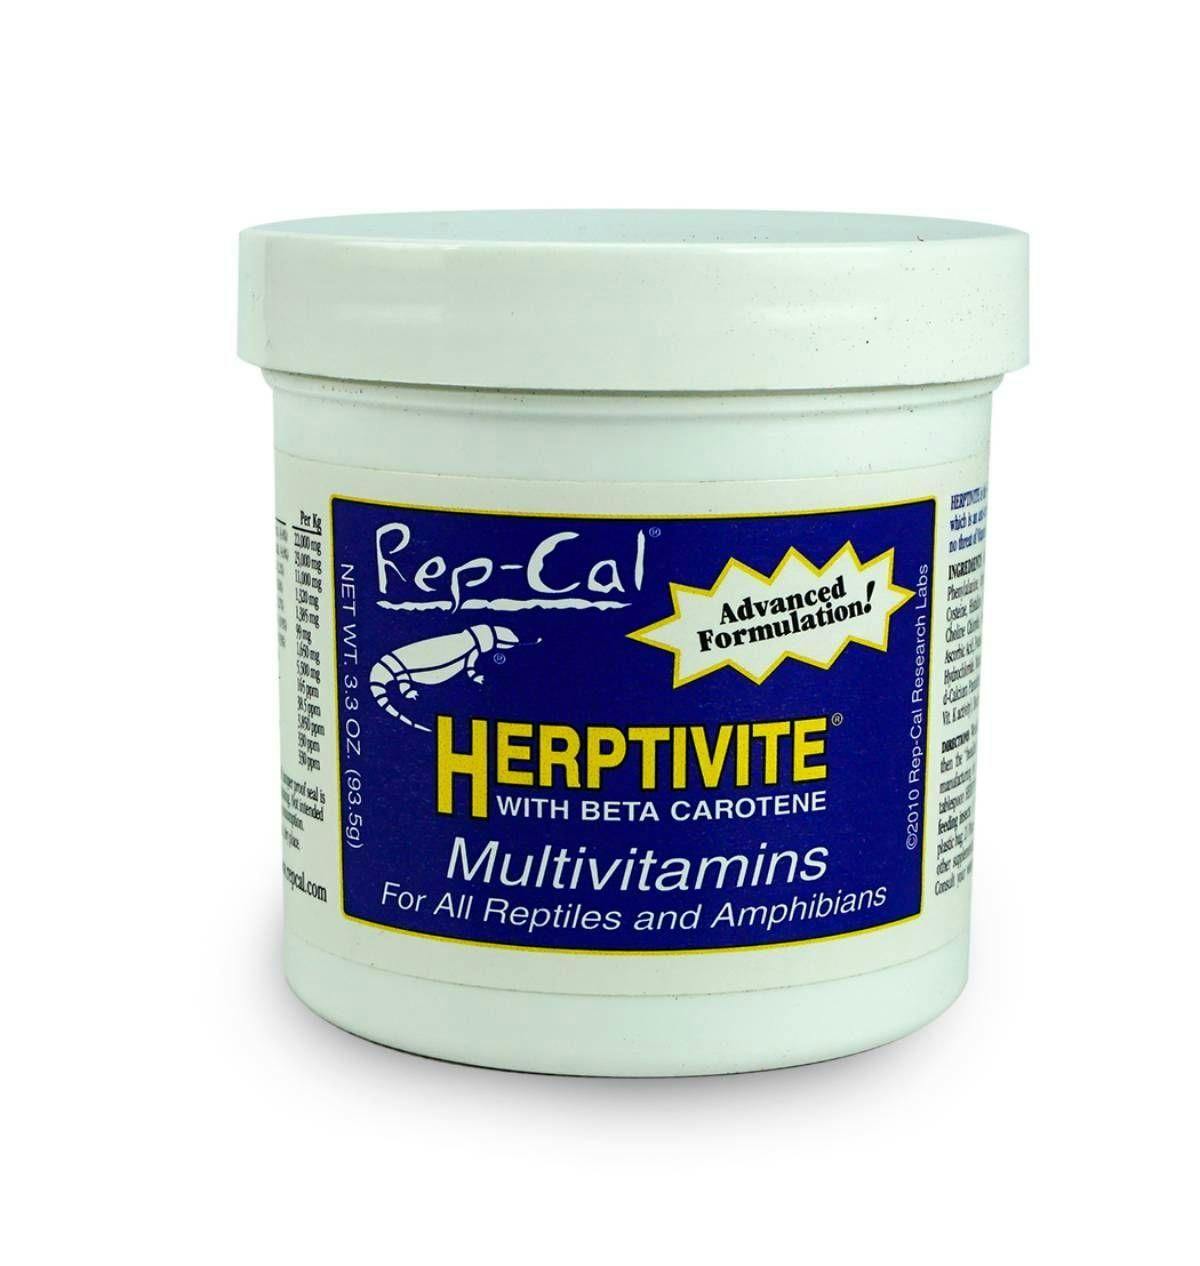 Image 1 for Rep-Cal Herptivite Multivitamin by Josh's Frogs